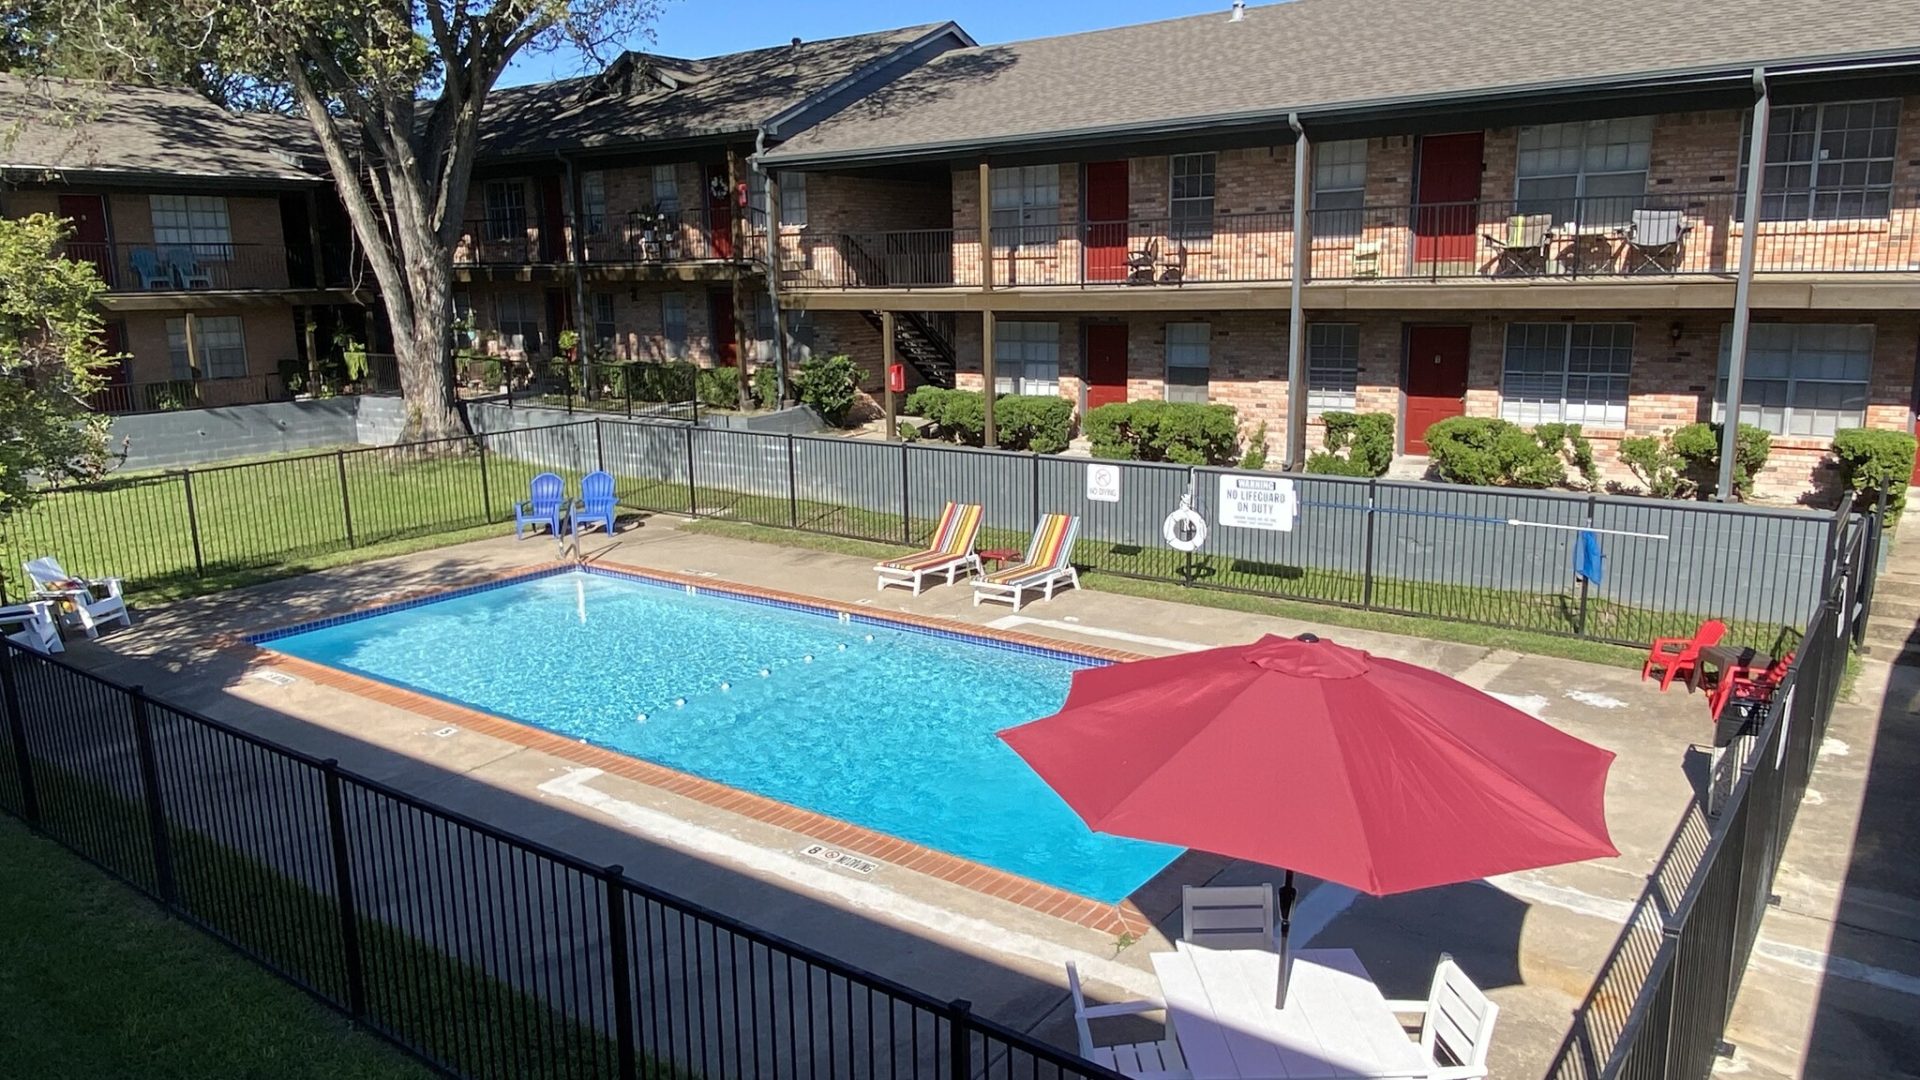 Sparking blue pool with red umbrella with comfortable outdoor seating in courtyard of the Claridge Apartments in Huntsville, TX.